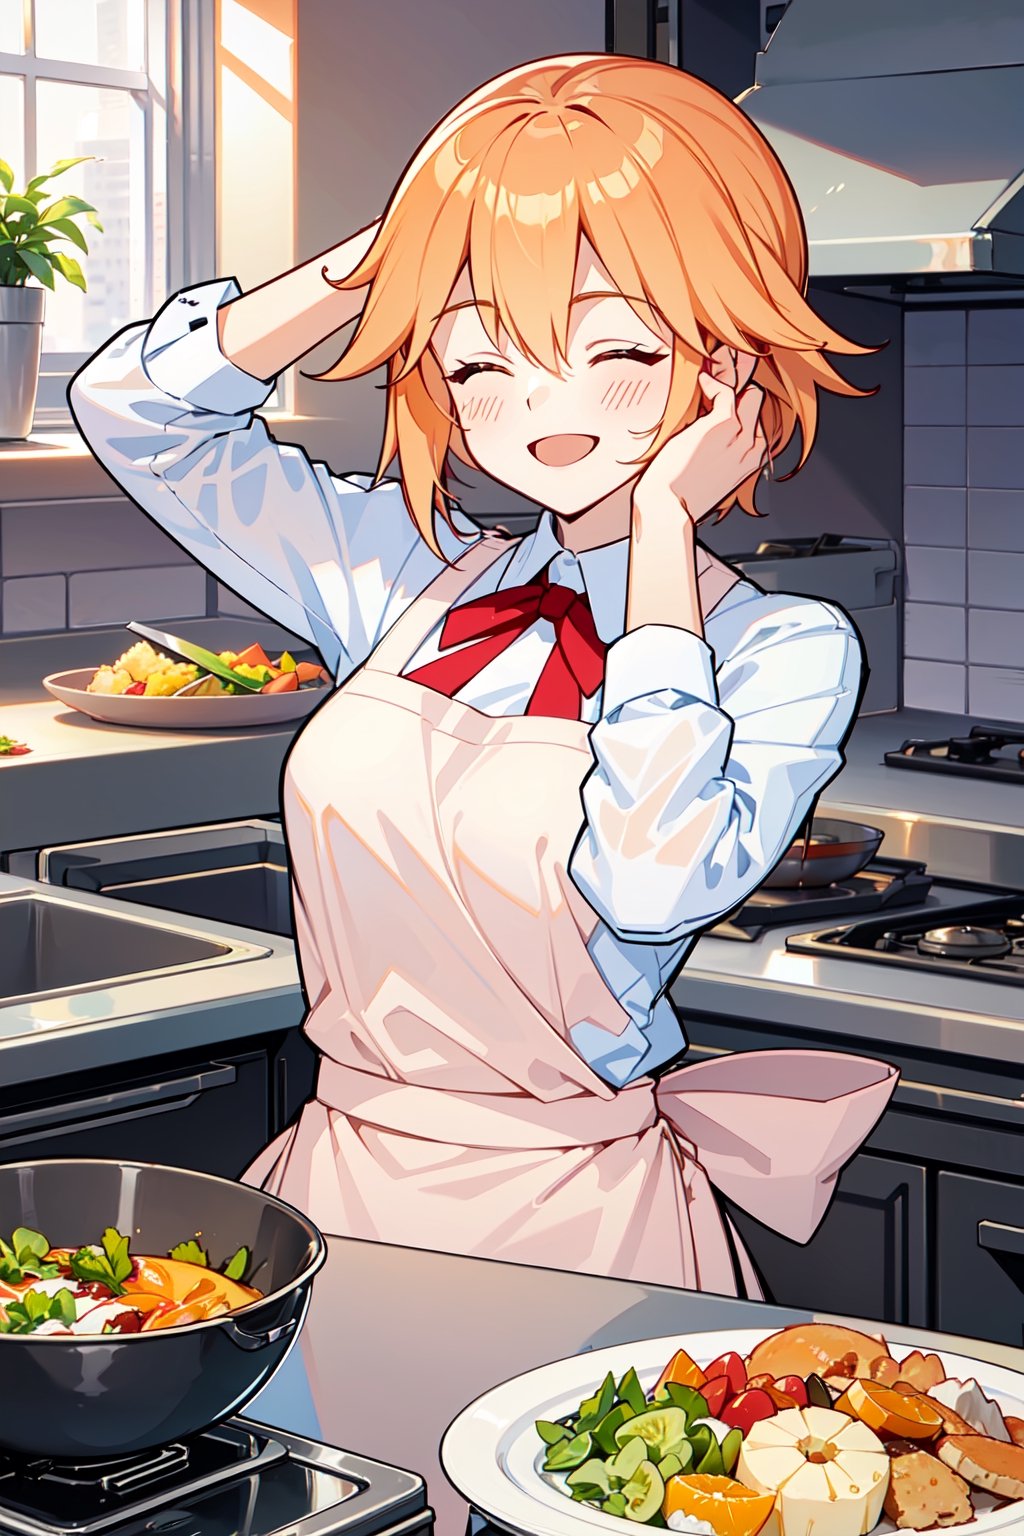 fanny, closed eyes, short ponytail hair, orange hair, upper body, happy, enthusiastic, smiling, grinning, shy, hands on head, white shirt aspirants, slim waist, pink apron, cook food, indoors kitchen, ingredients cooking, kitchen tools, masterpieces.